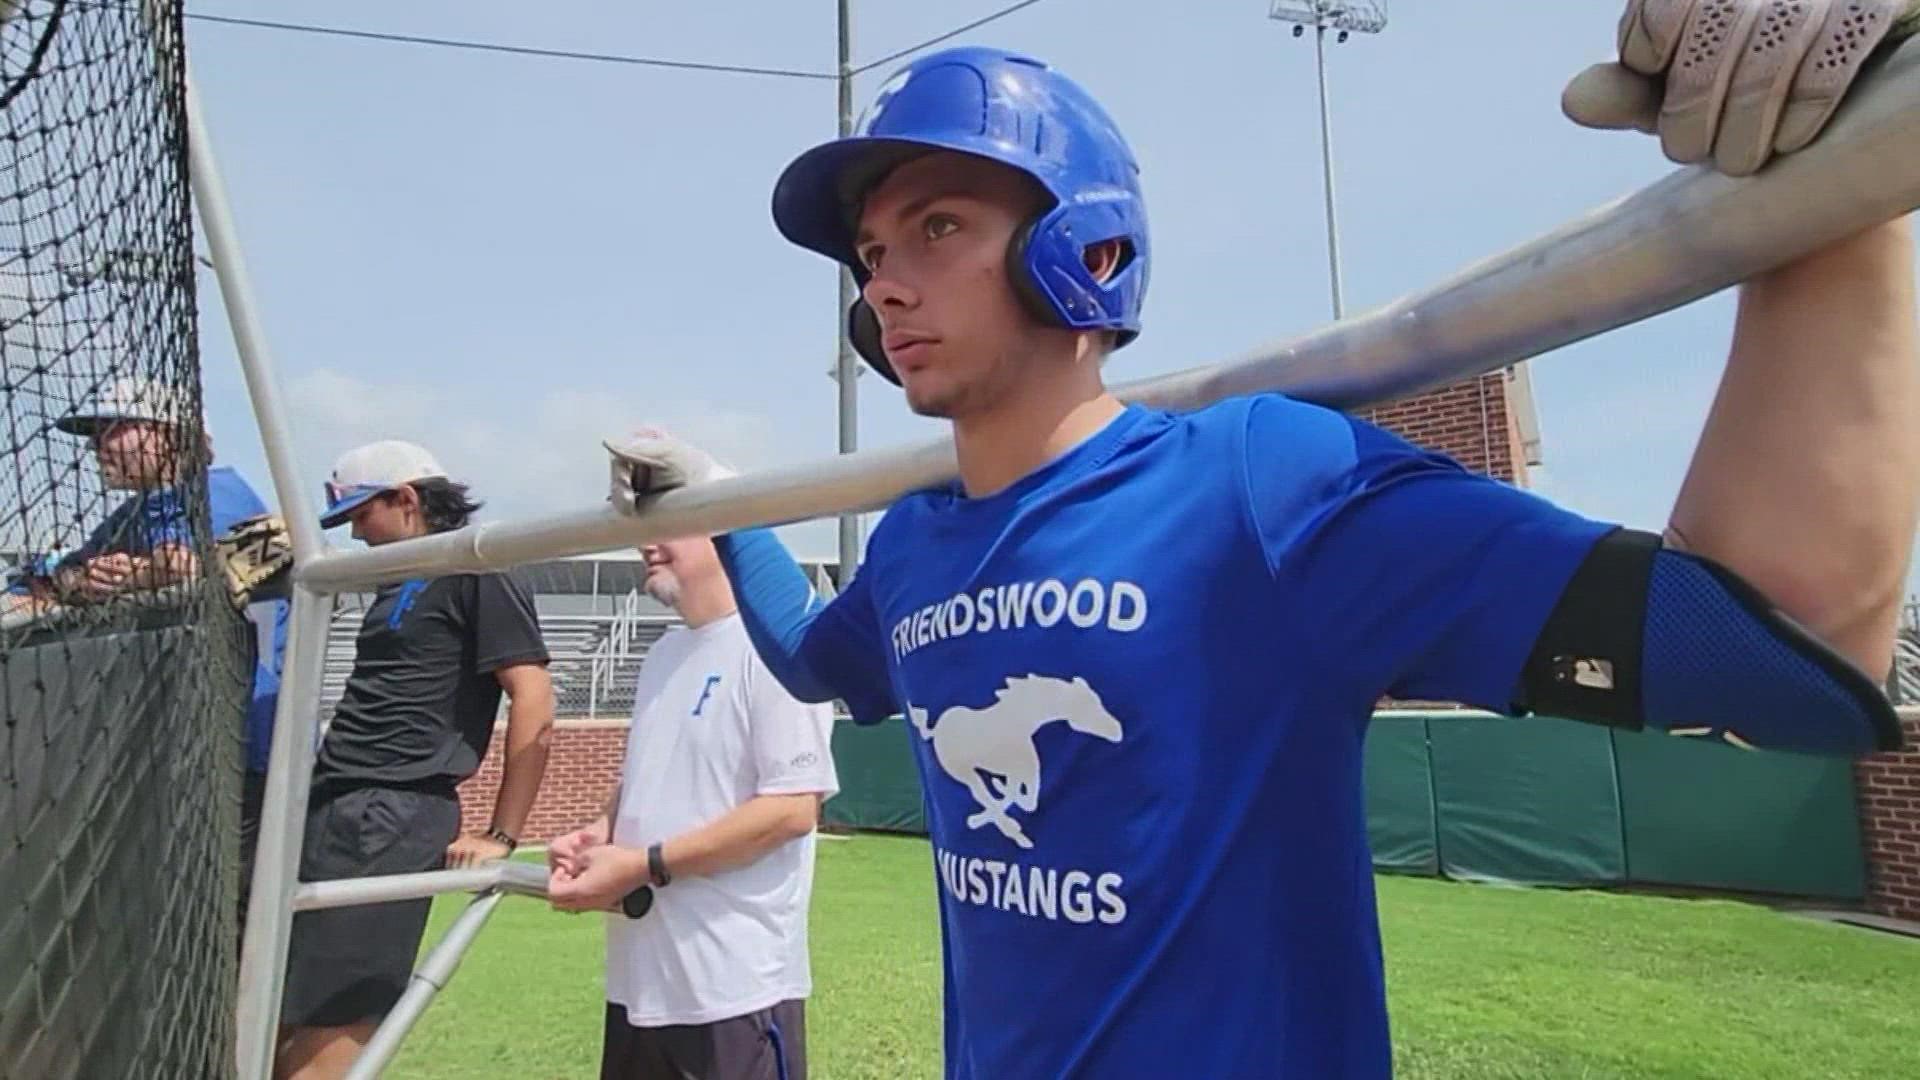 High school baseball teams from across Texas are meeting up to see who will bring home the title.